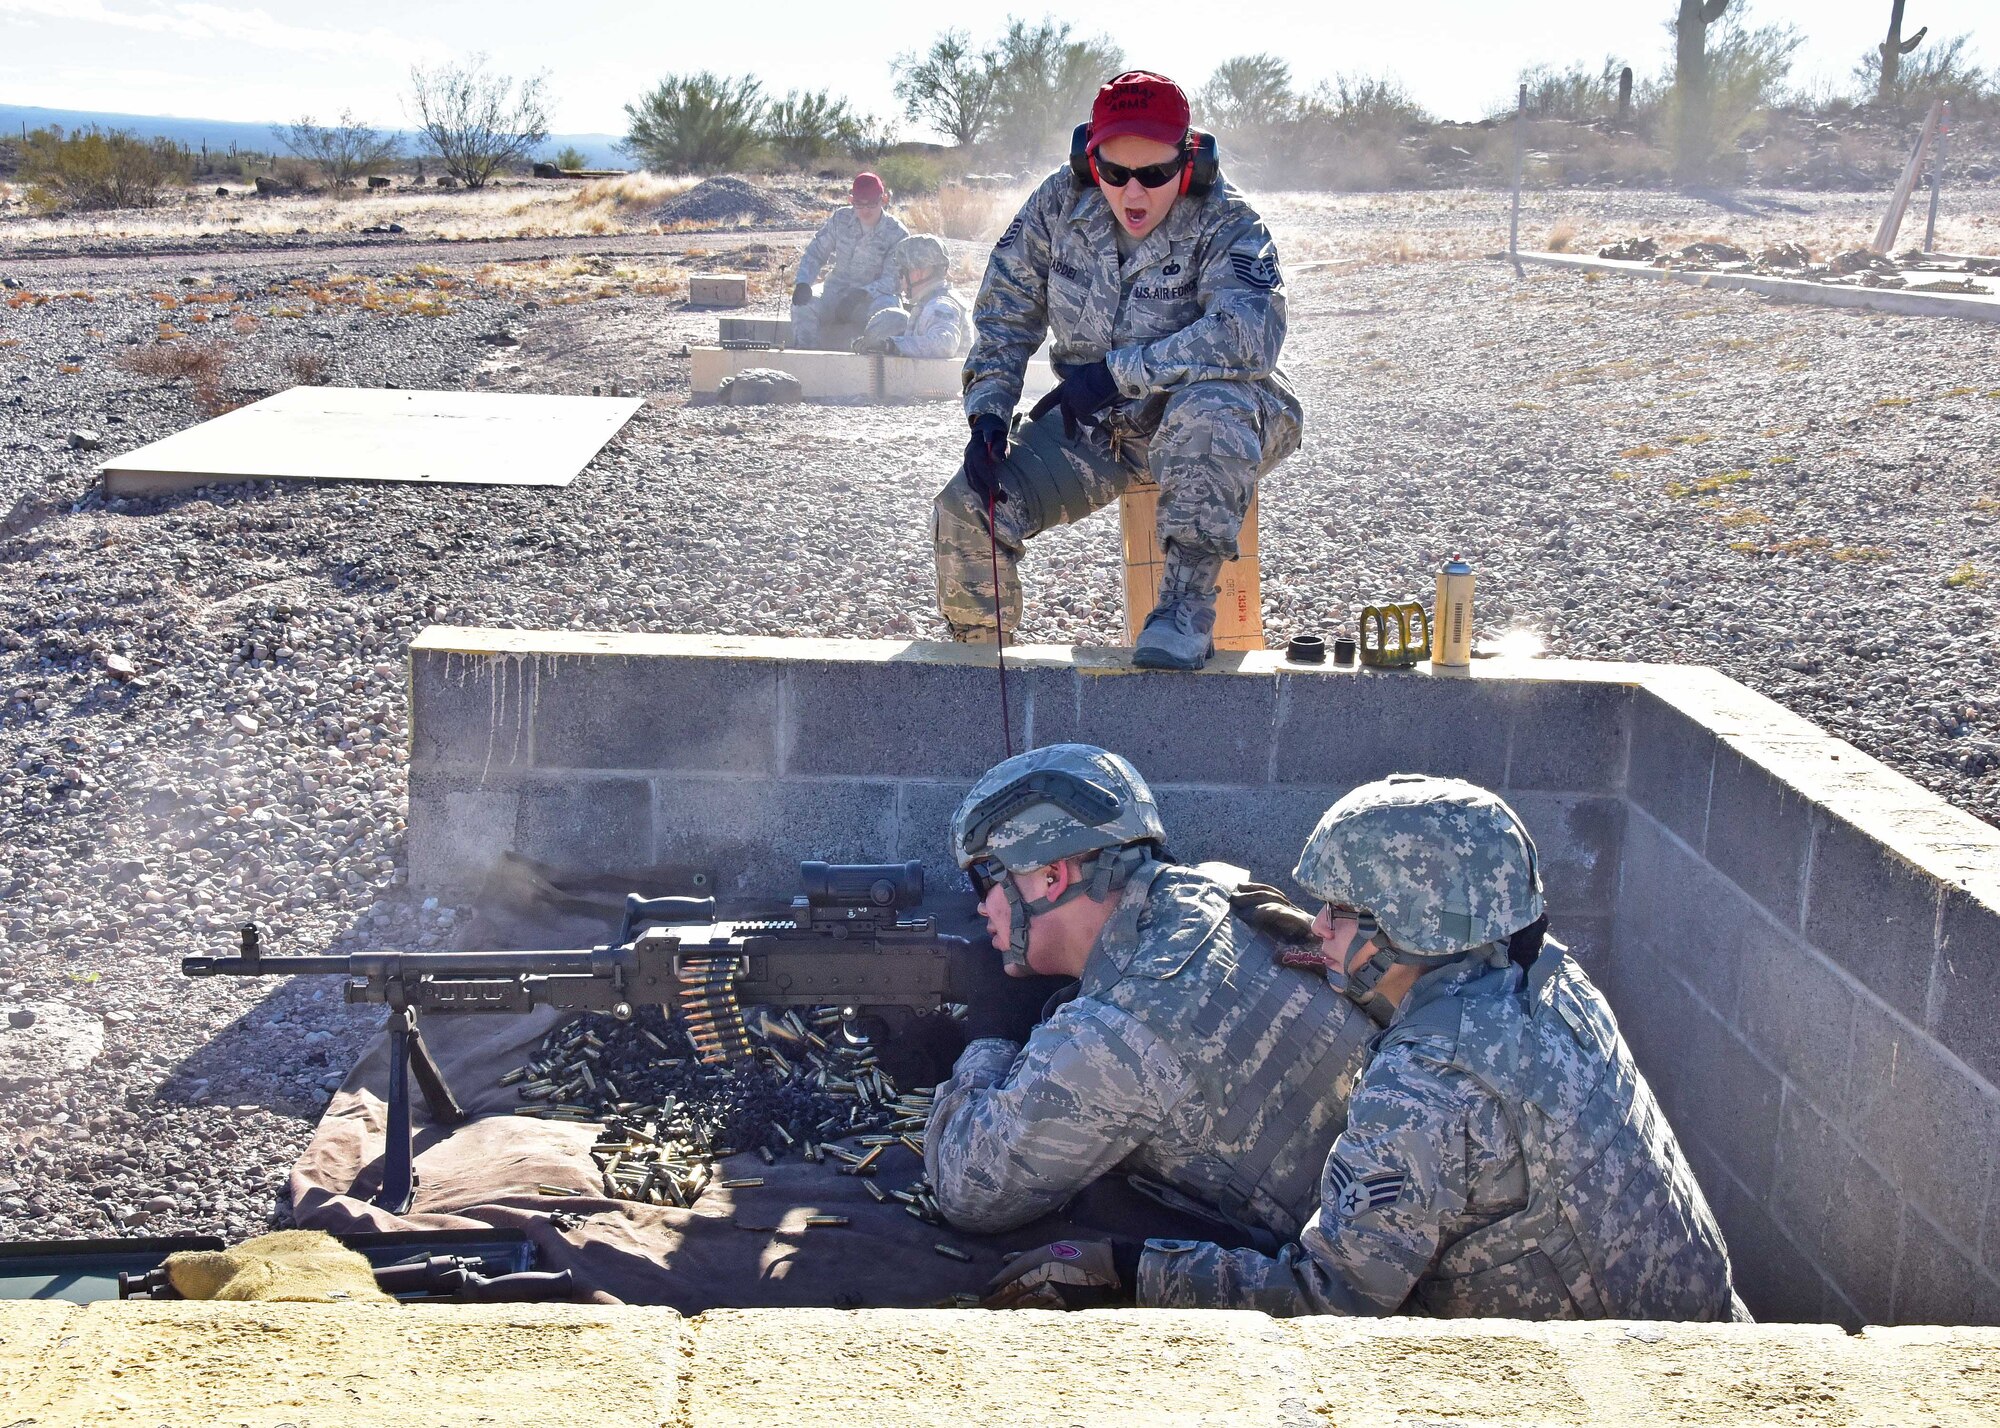 Tech. Sgt. Leah Taddei, 944th Security Forces combat arms training and maintenance instructor, directs Senior Airman Antonio Duarte, fire team member, as he fires the M240B Dec. 3 at the Army National Guard range in Florence, Ariz. Senior Airman Dominique Castillo, fire team member, guides and informs Duarte of the vicinity of his rounds. This was part of their yearly heavy weapons qualifications. (U.S. Air Force photo taken by Tech. Sgt. Louis Vega Jr.)